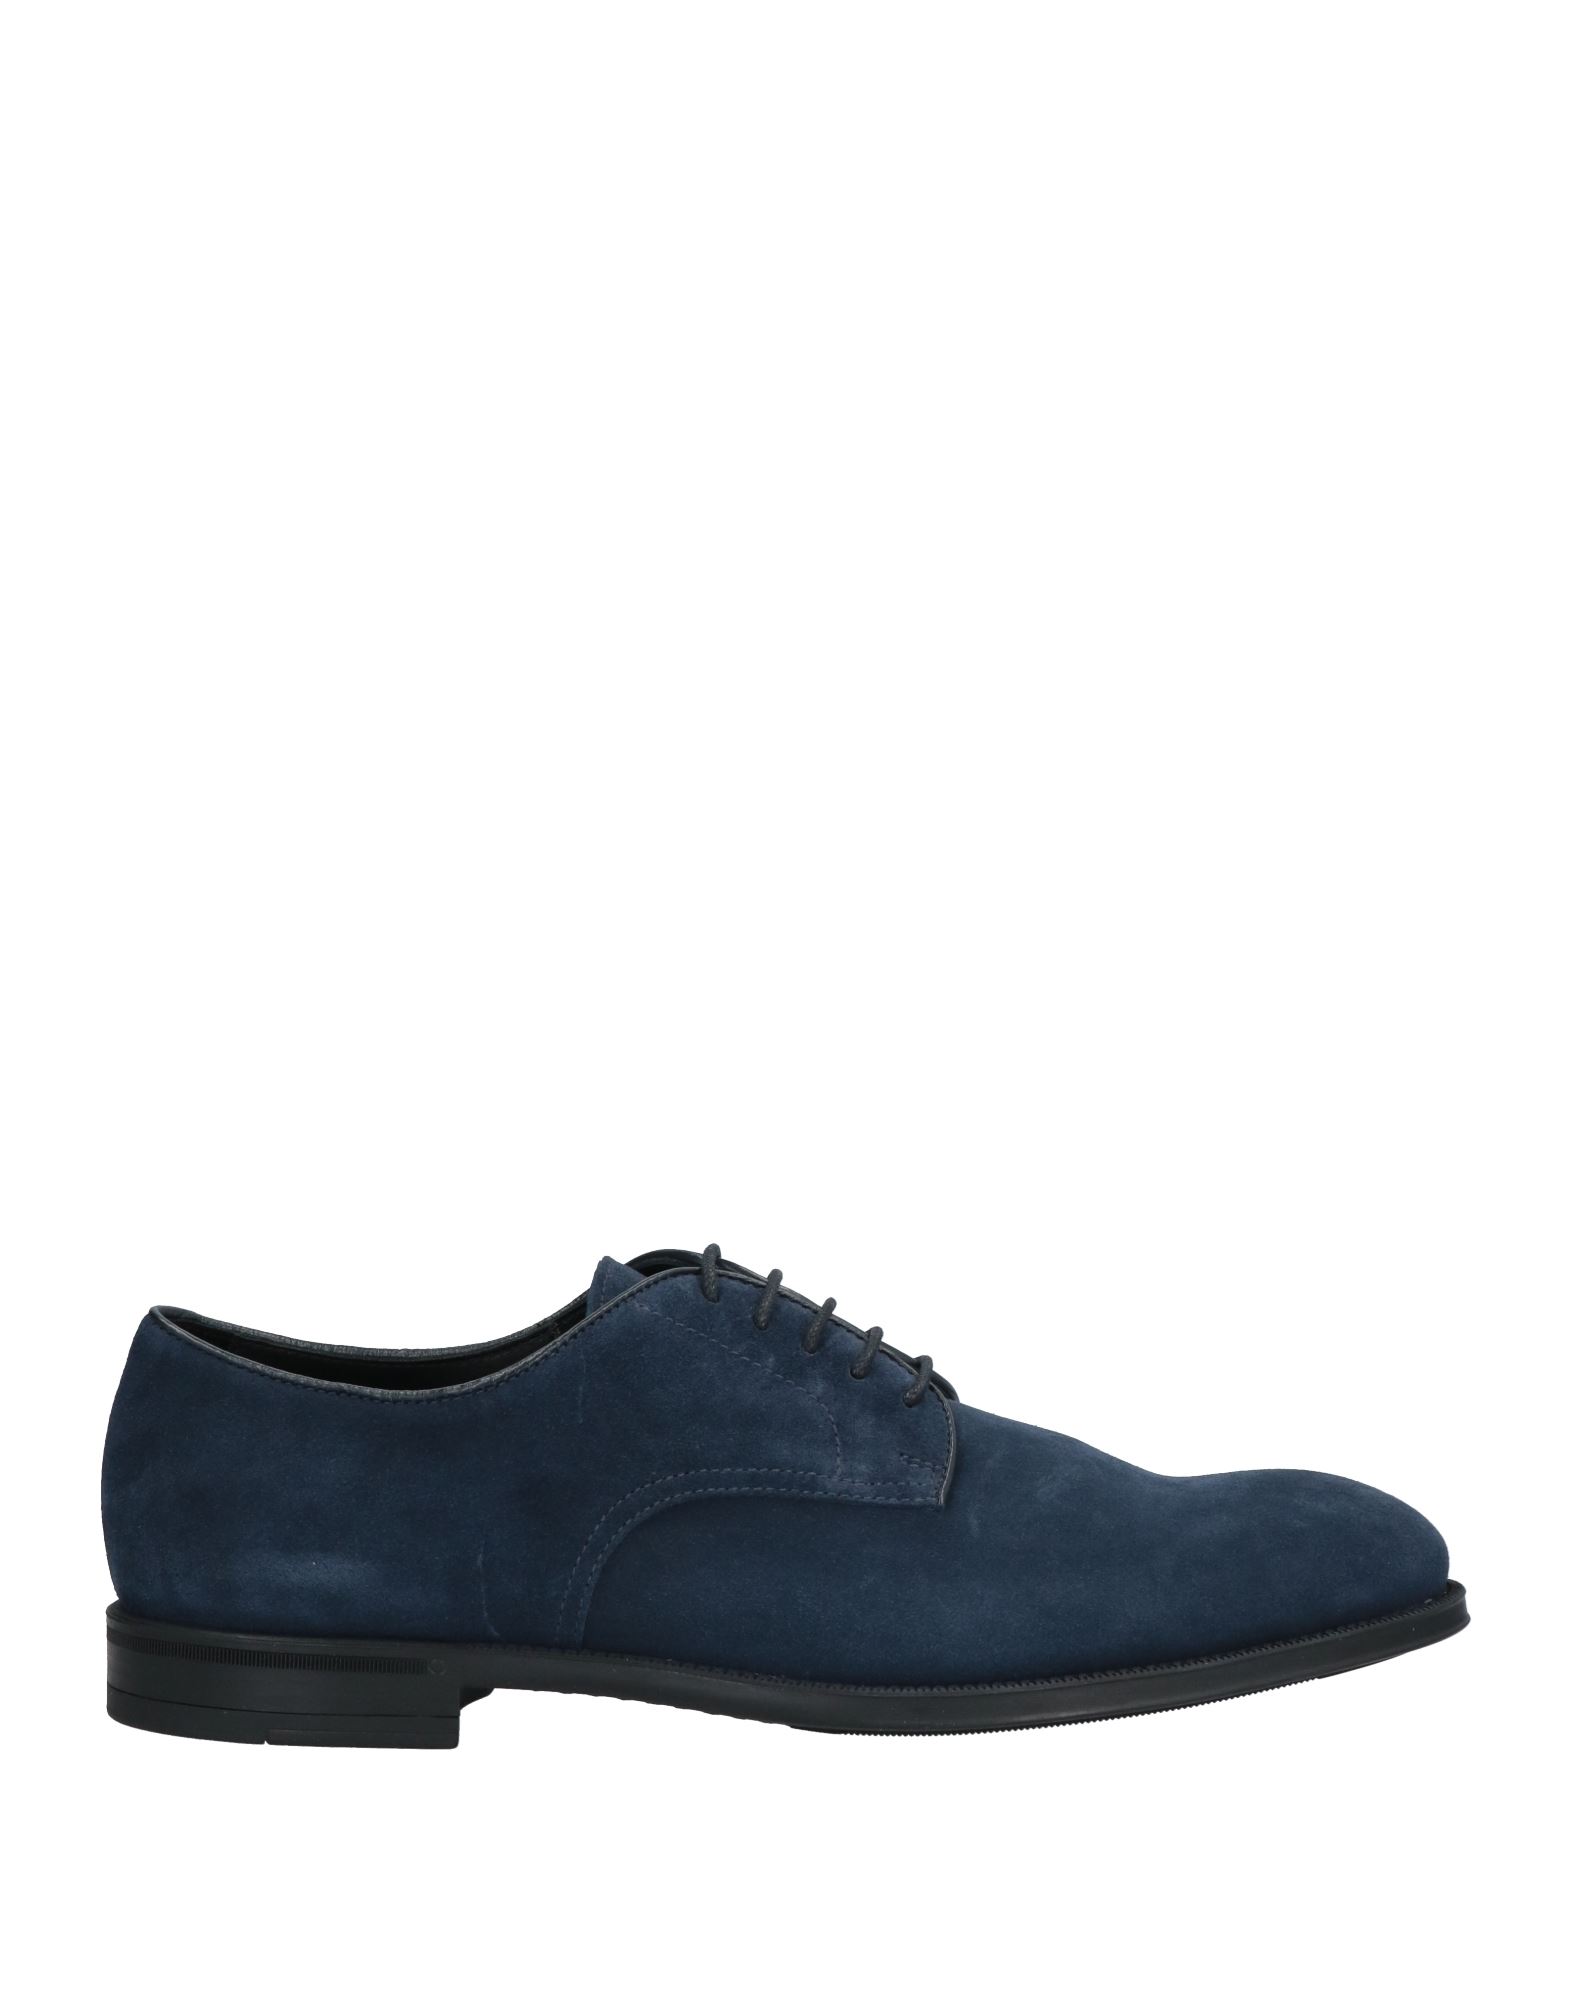 Doucal's Man Lace-up Shoes Navy Blue Size 8 Soft Leather